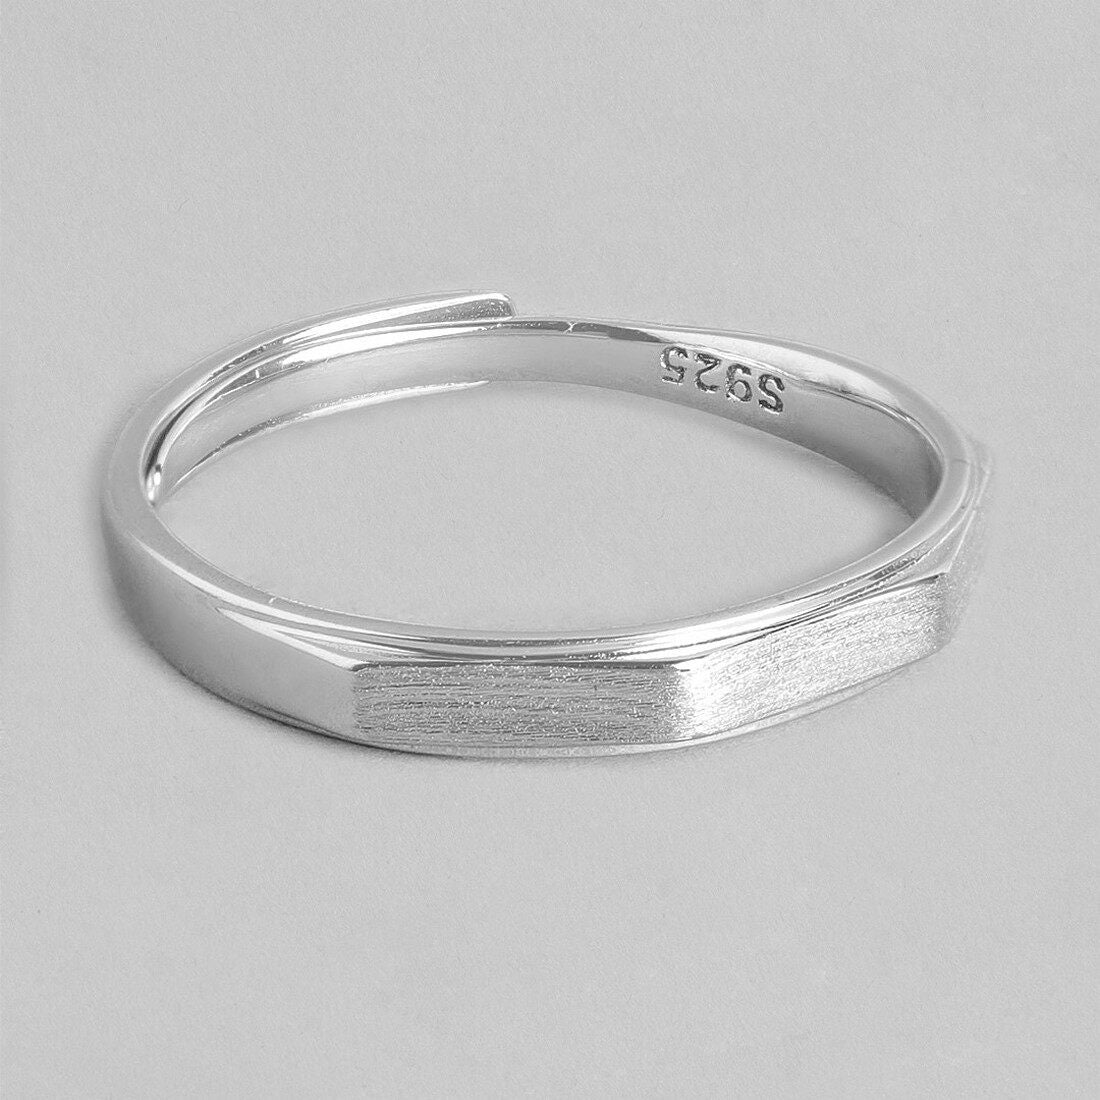 Bold and Versatile Adjustable Sterling Silver Ring for Him